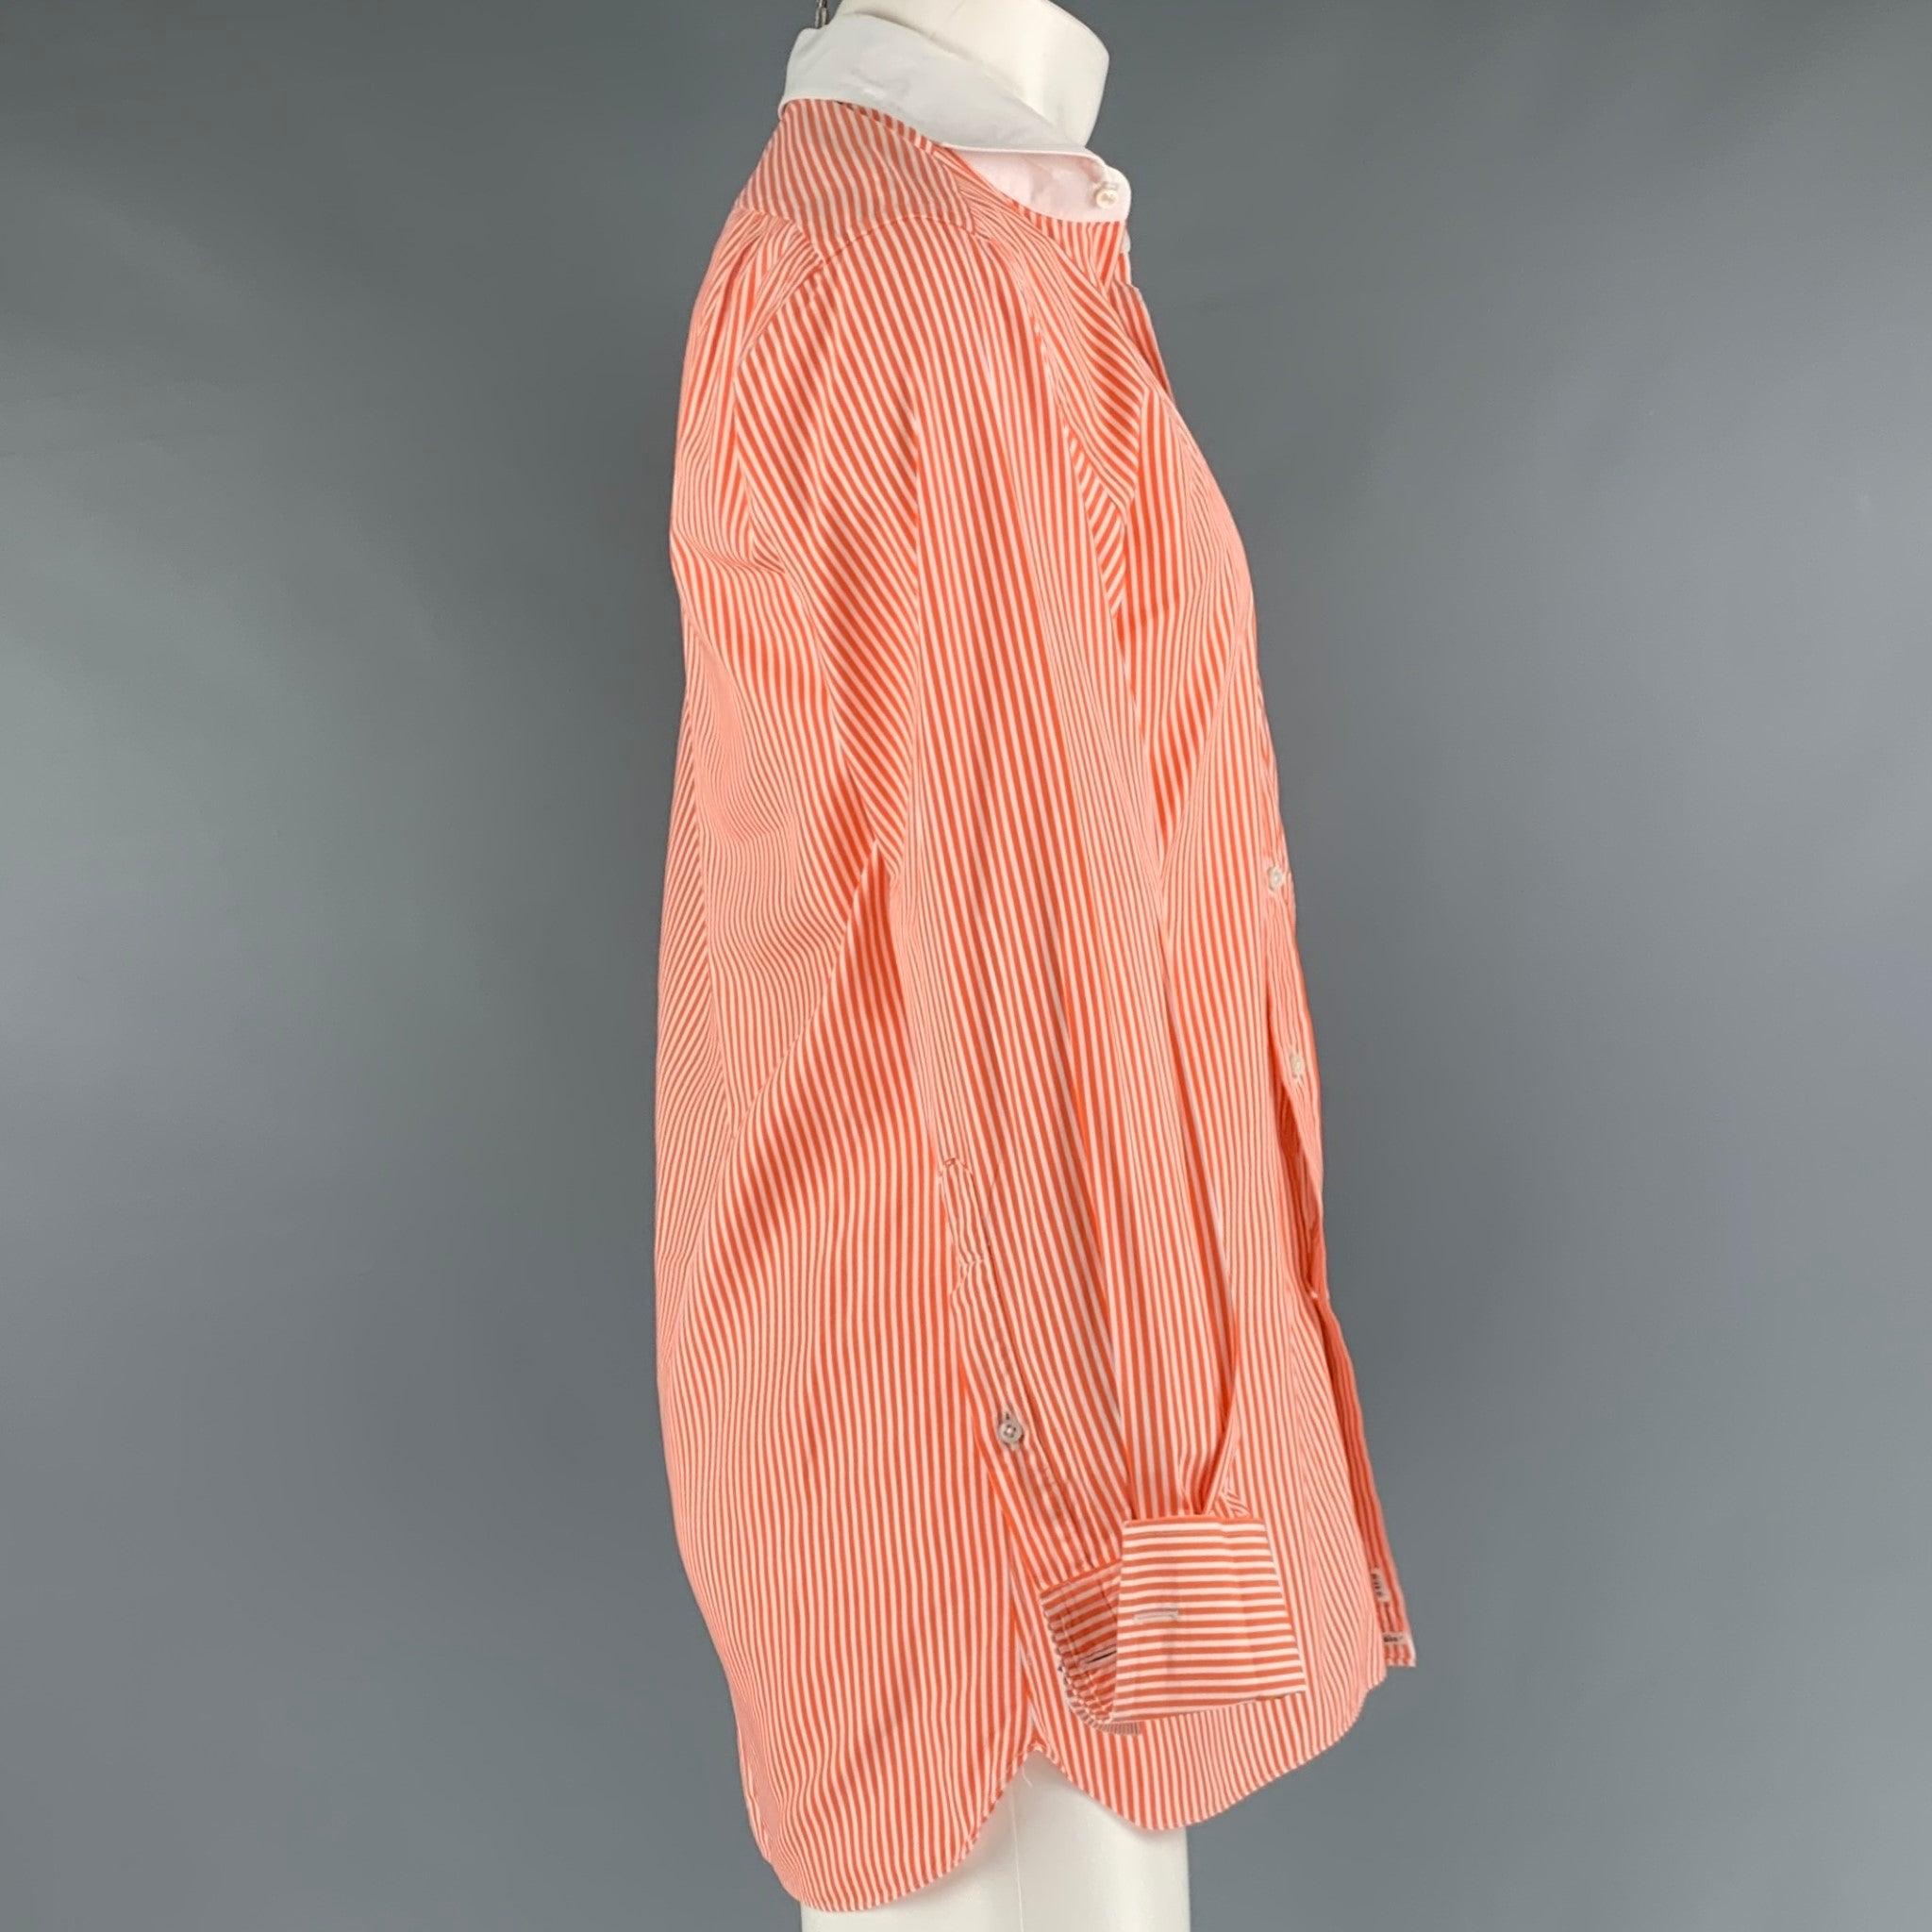 RALPH LAUREN Size M Orange White Stripe Cotton French Cuff Long Sleeve Shirt In Excellent Condition For Sale In San Francisco, CA